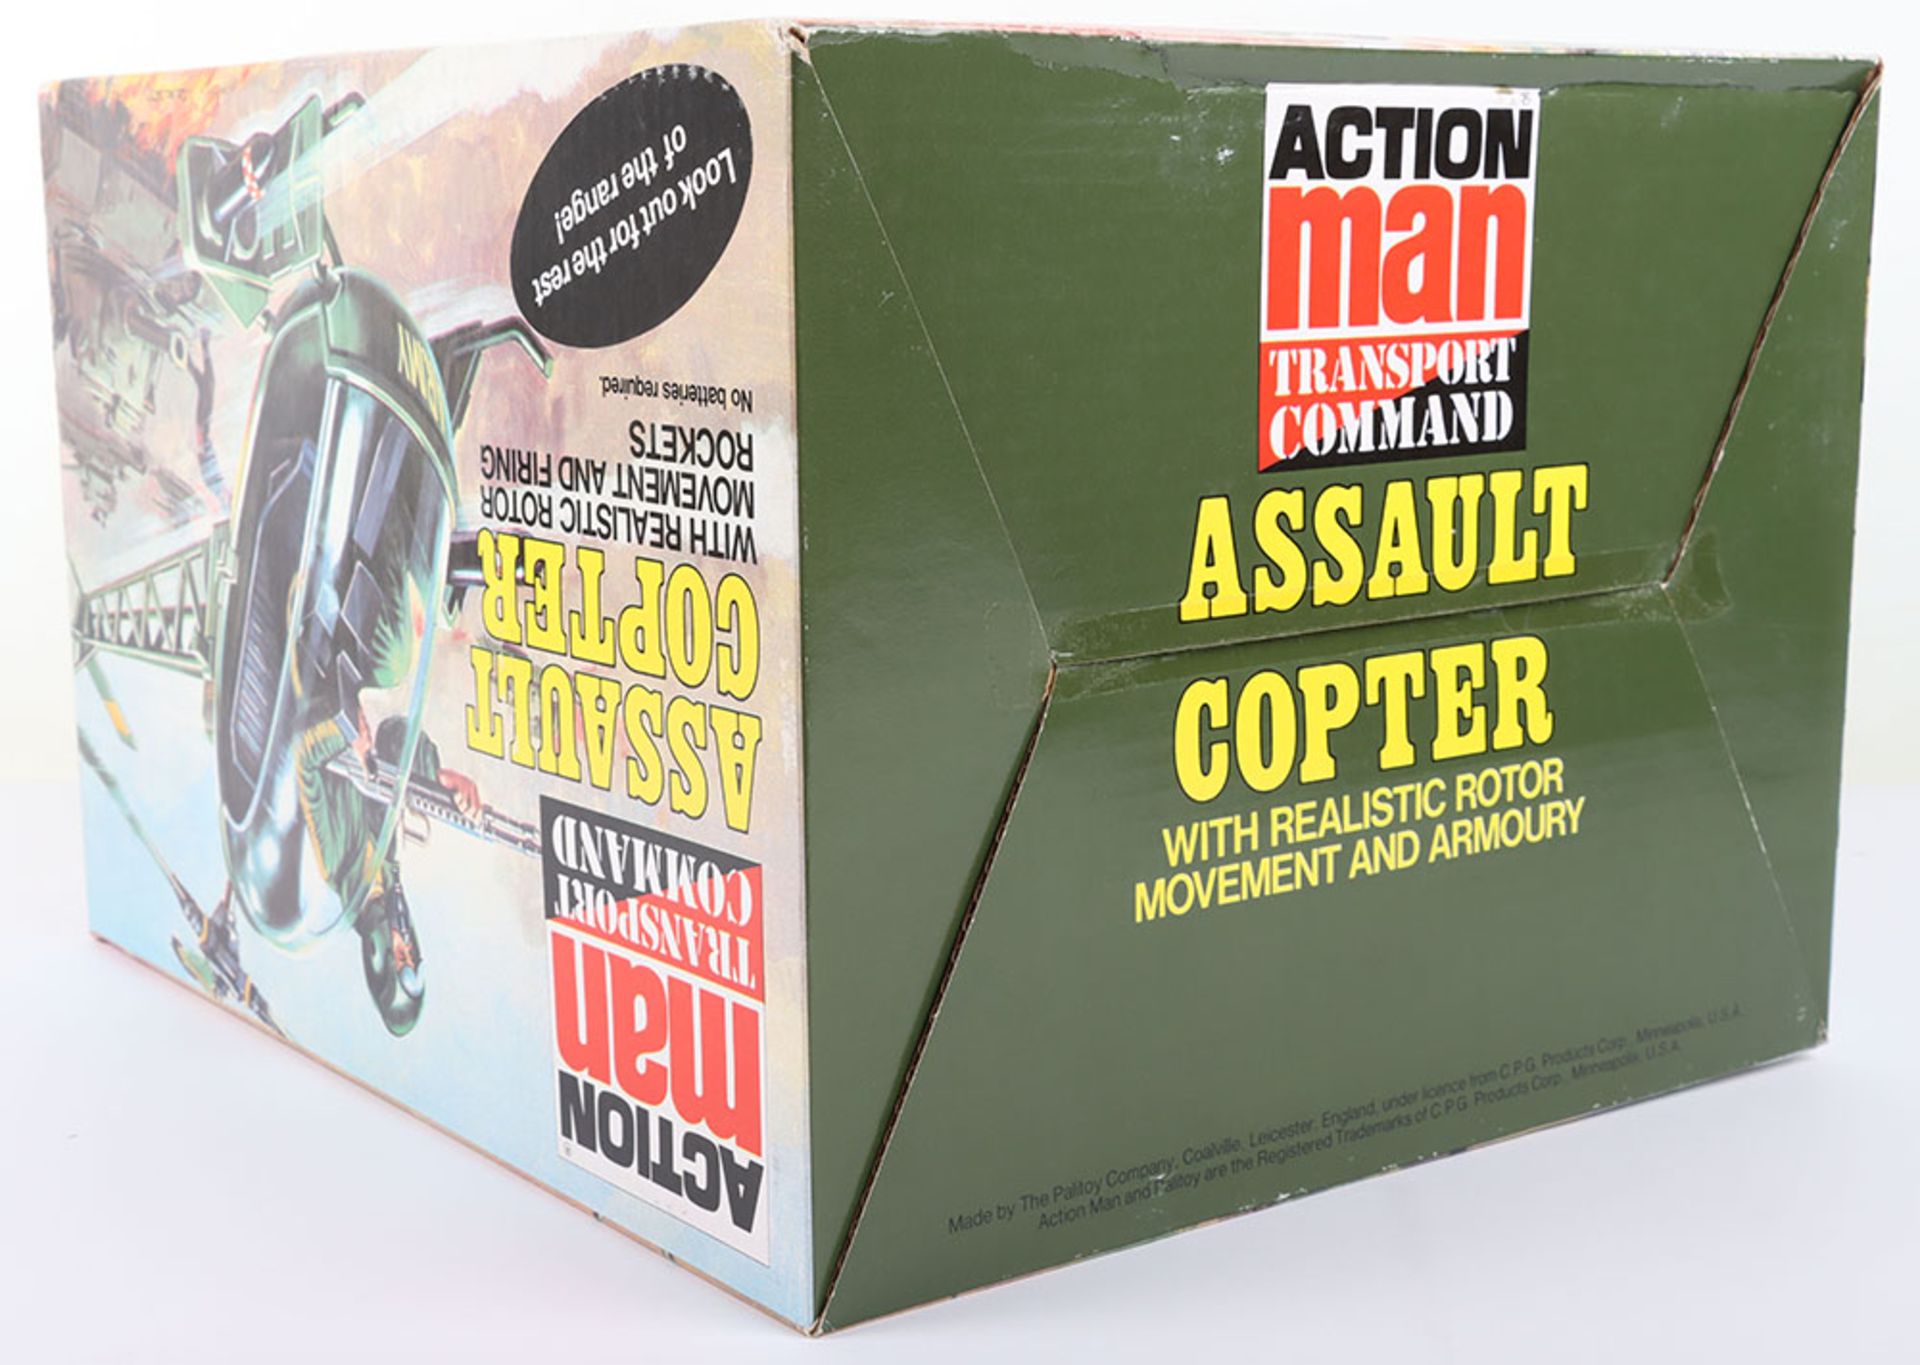 Palitoy Action Man Transport Command Assault Copter - Image 3 of 4